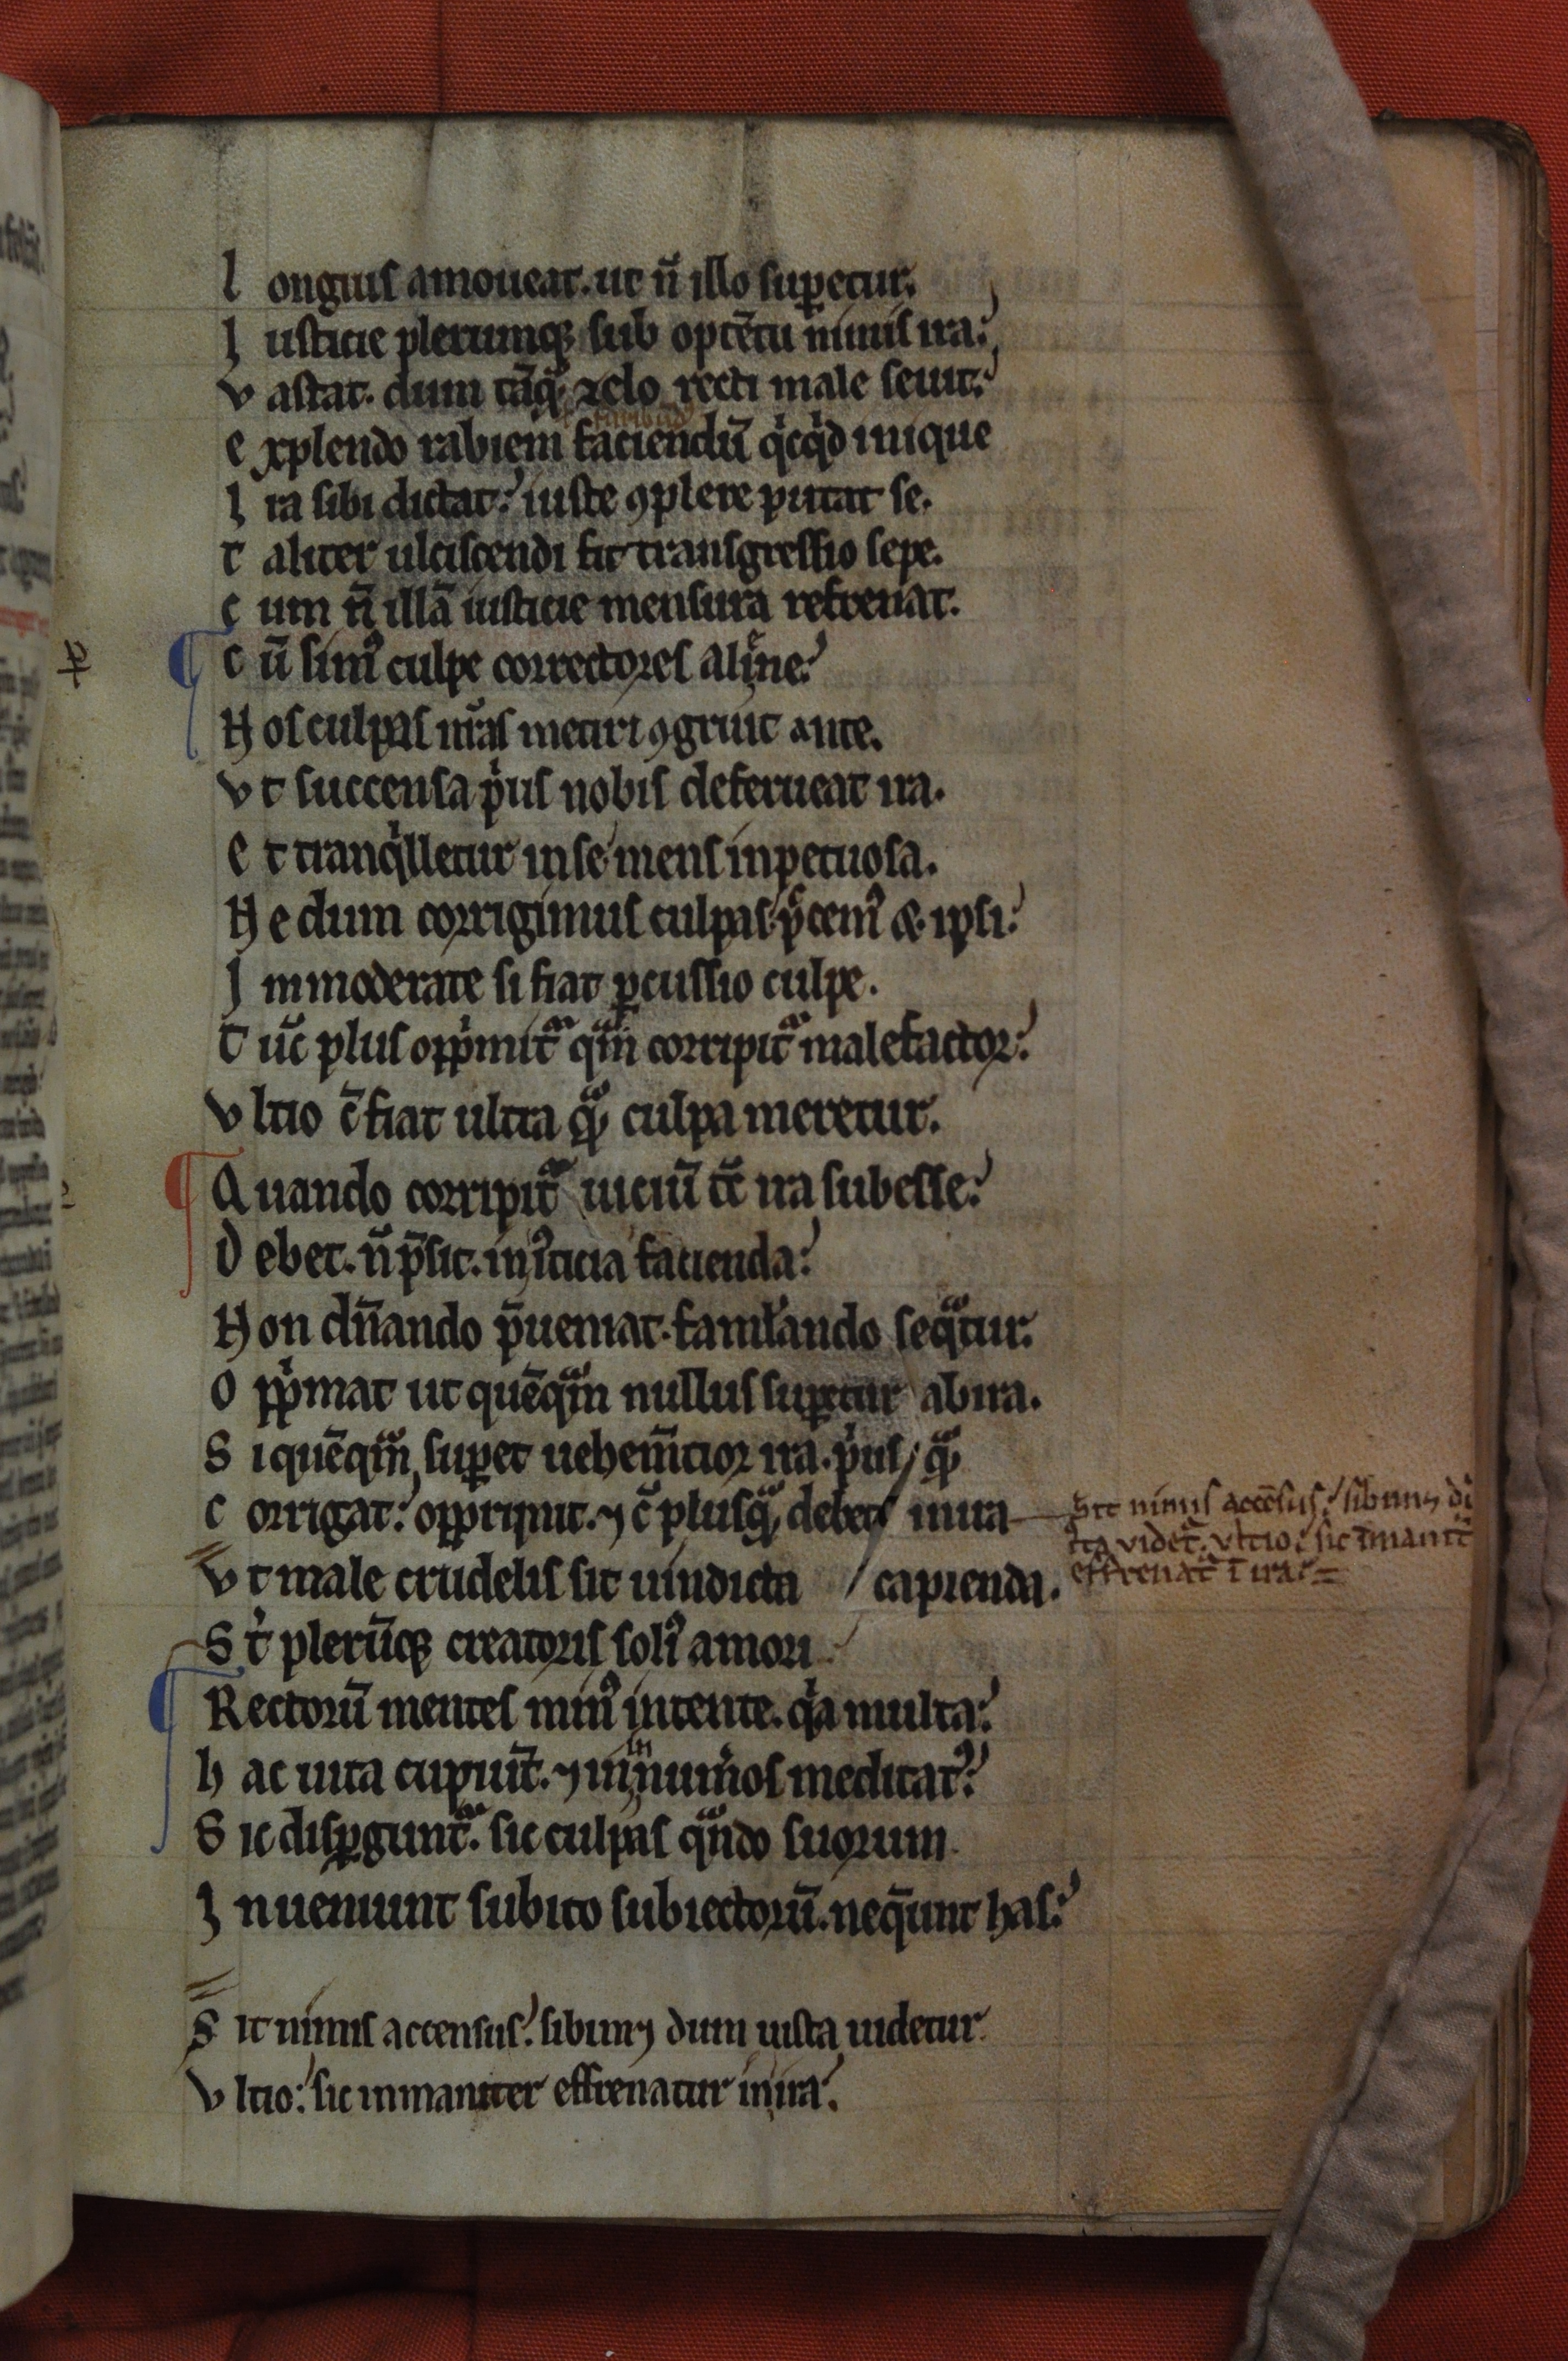 Inline and marginal corrections to Cambridge, Pembroke College, MS 115, fol. 39r, with added verses later recopied at the bottom of the page by a contemporary scribe.